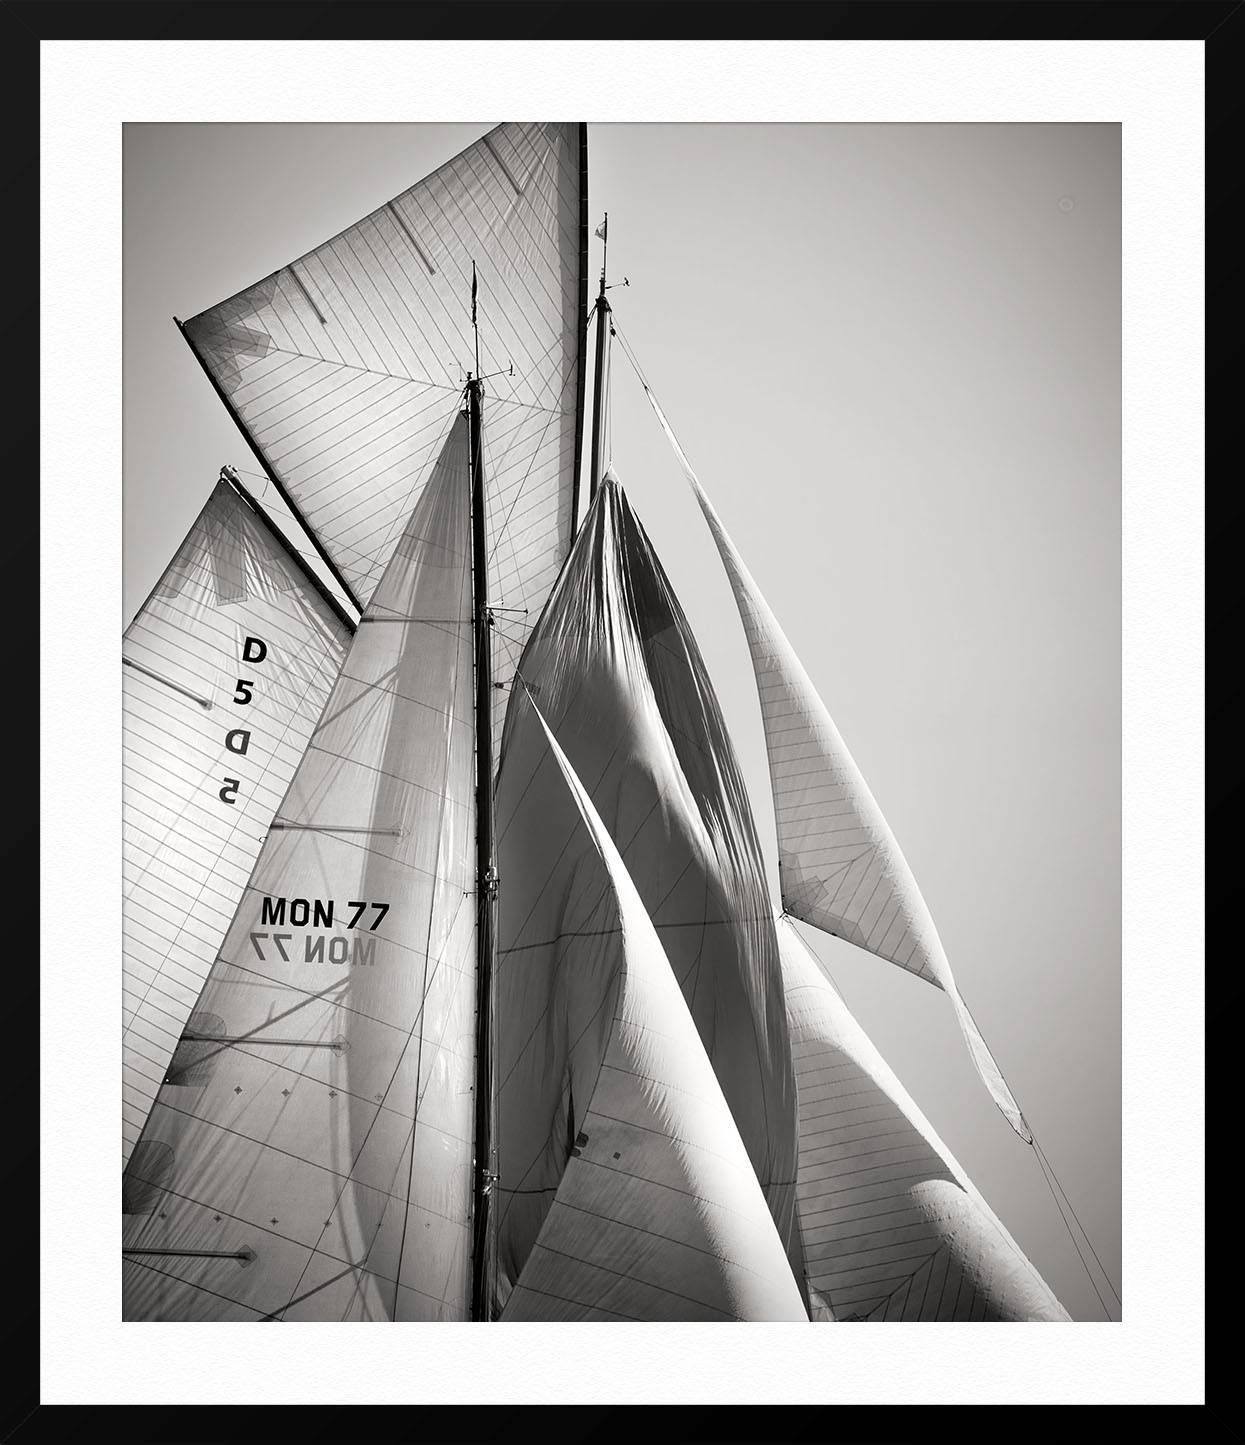 ABOUT THIS PIECE: Since 2008 fine art photographer Jonathan Chritchley has regularly been invited to attend the Classic Yacht Regattas on the legendary Cote d’Azur in France, working in and around the waters off such glamorous spots as Saint-Tropez,